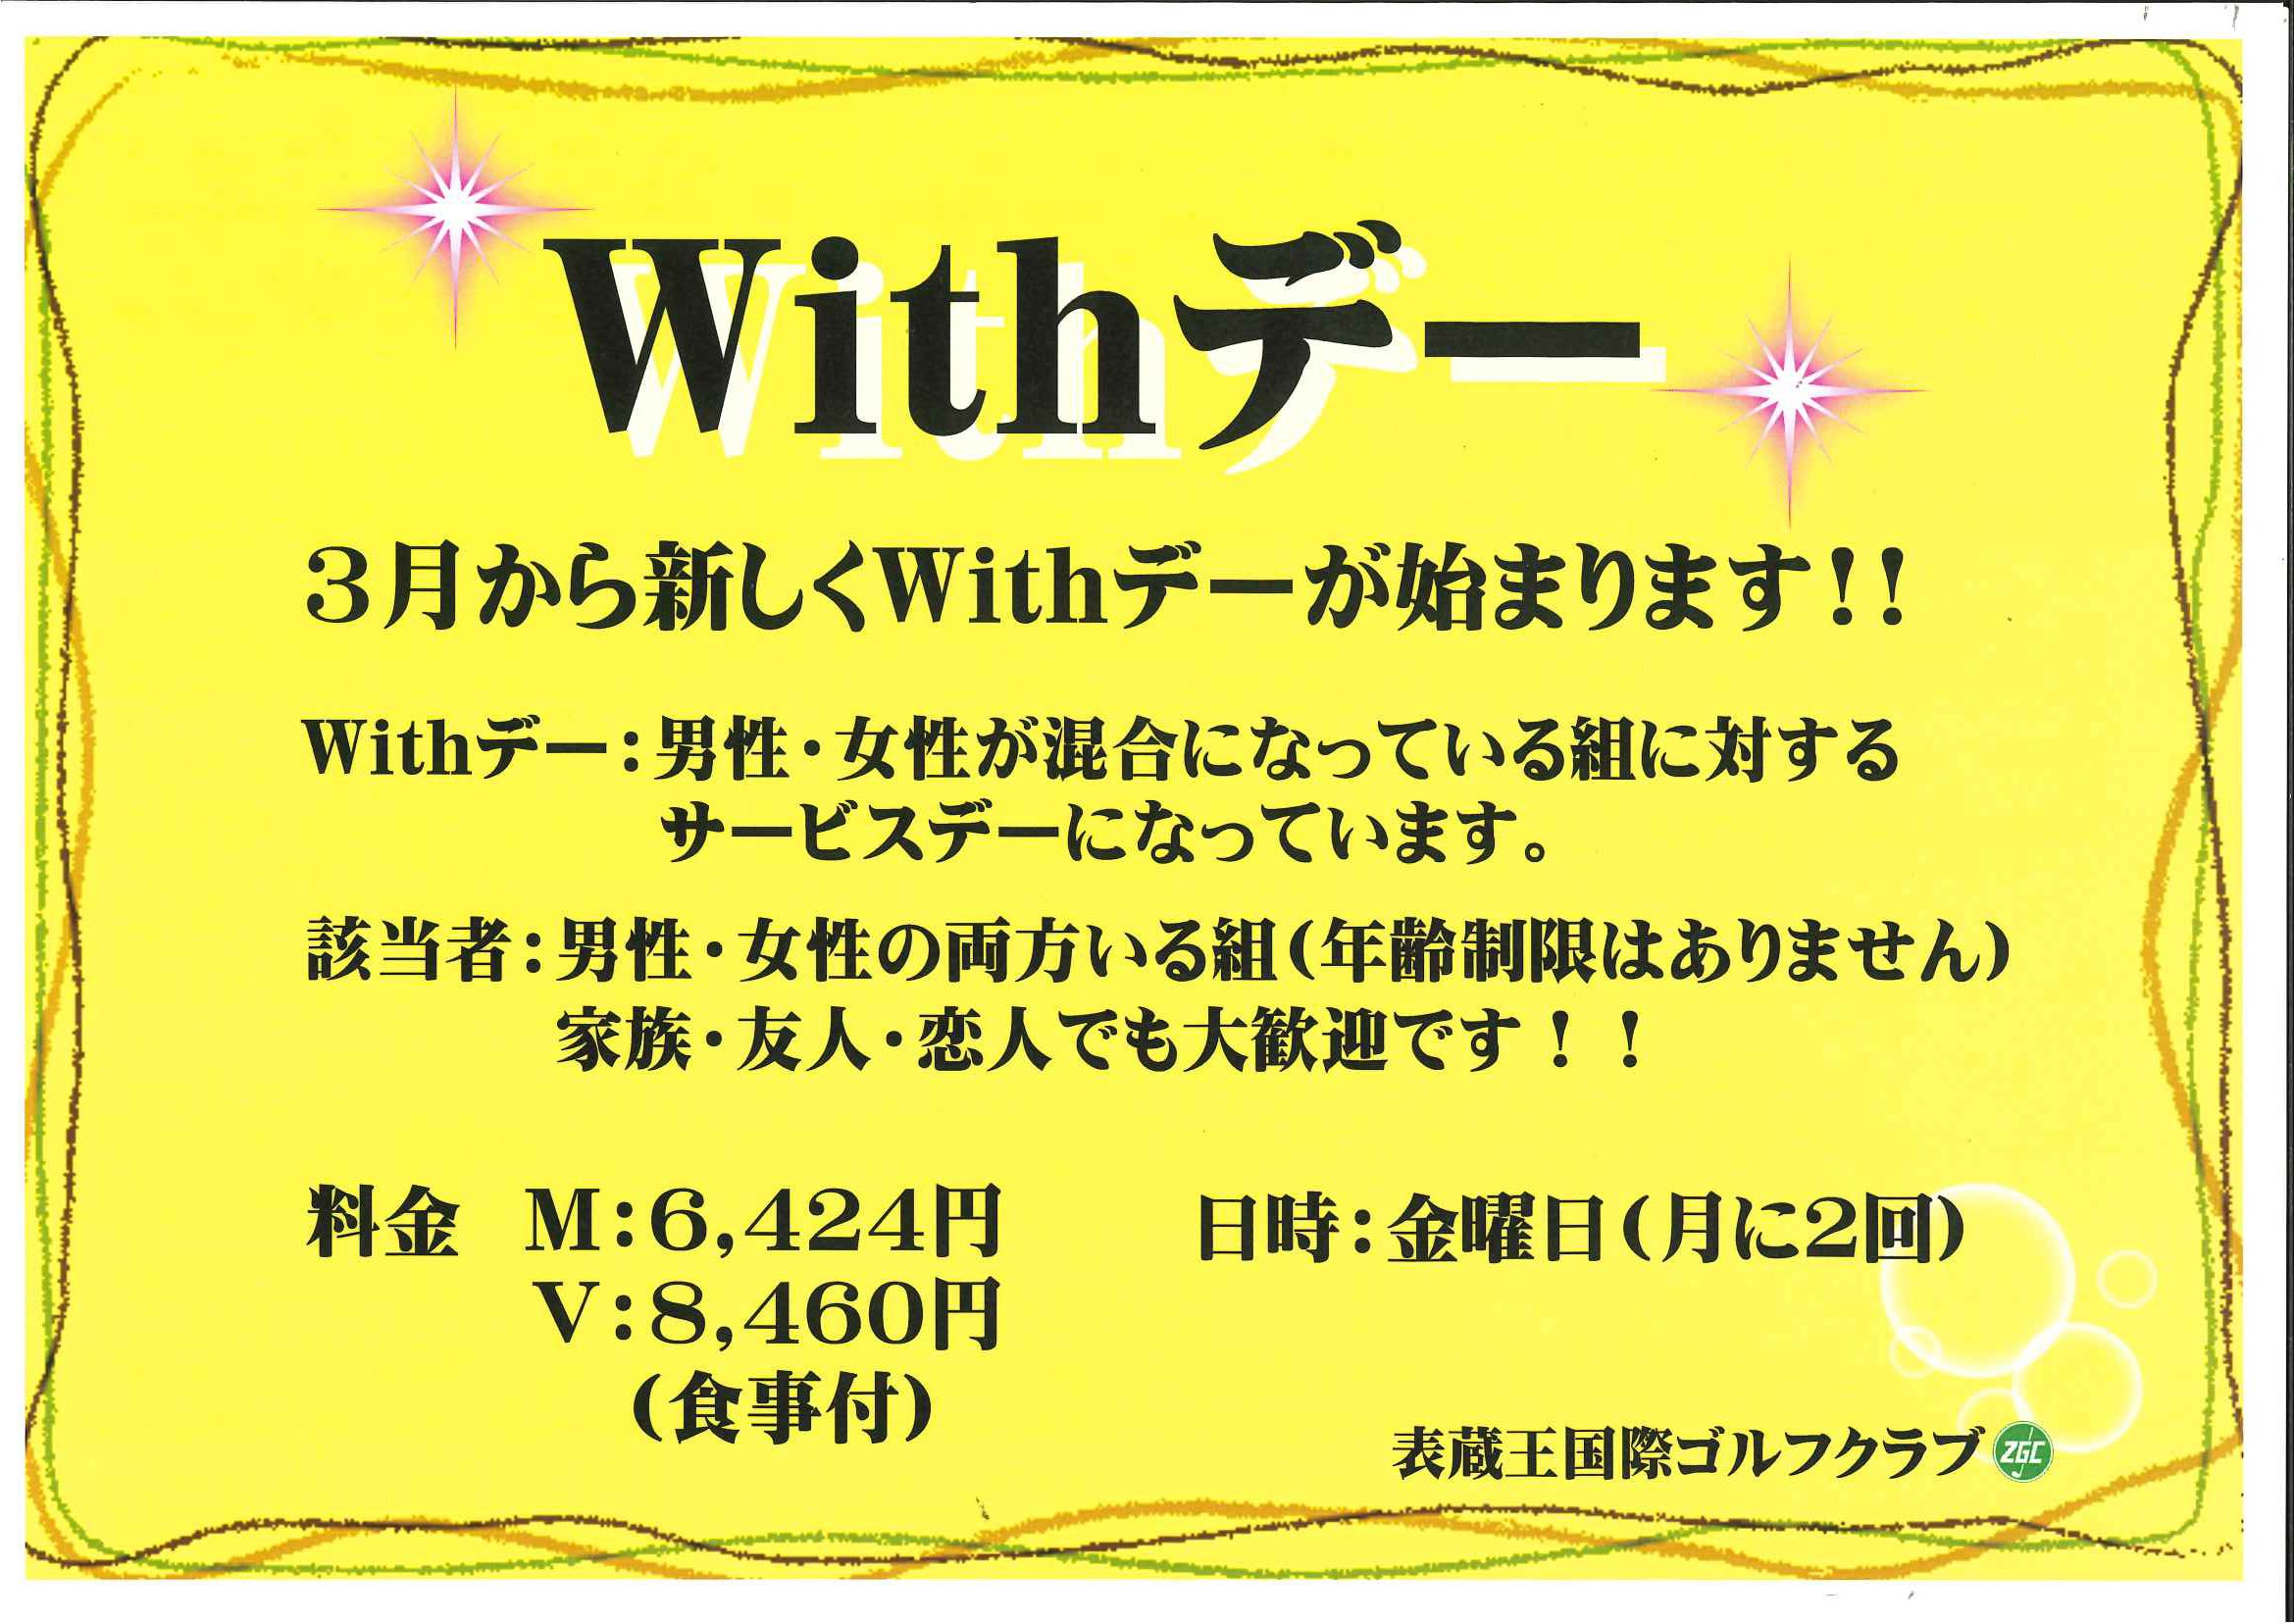 Withデー